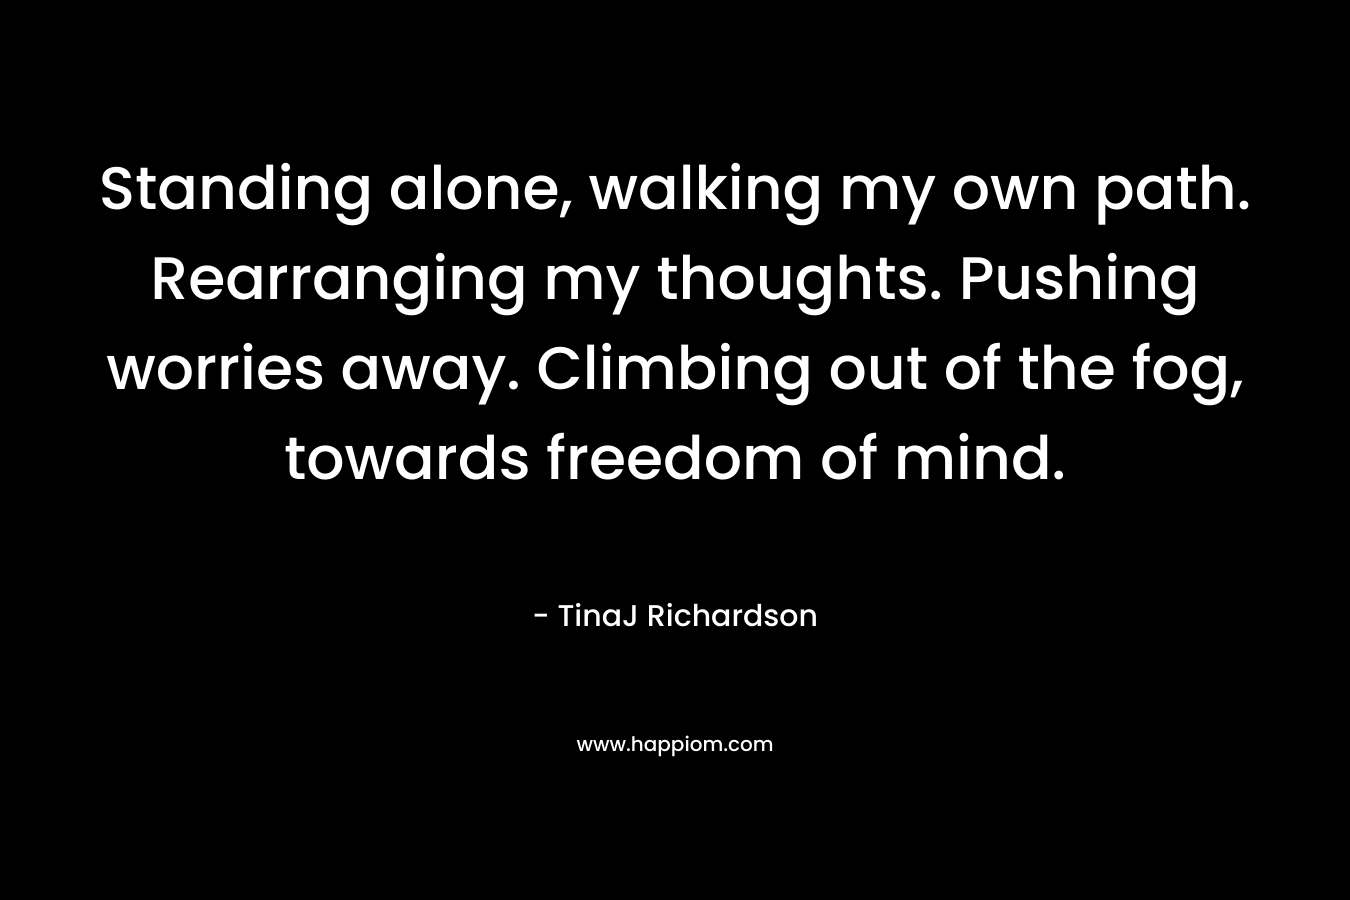 Standing alone, walking my own path. Rearranging my thoughts. Pushing worries away. Climbing out of the fog, towards freedom of mind. – TinaJ Richardson